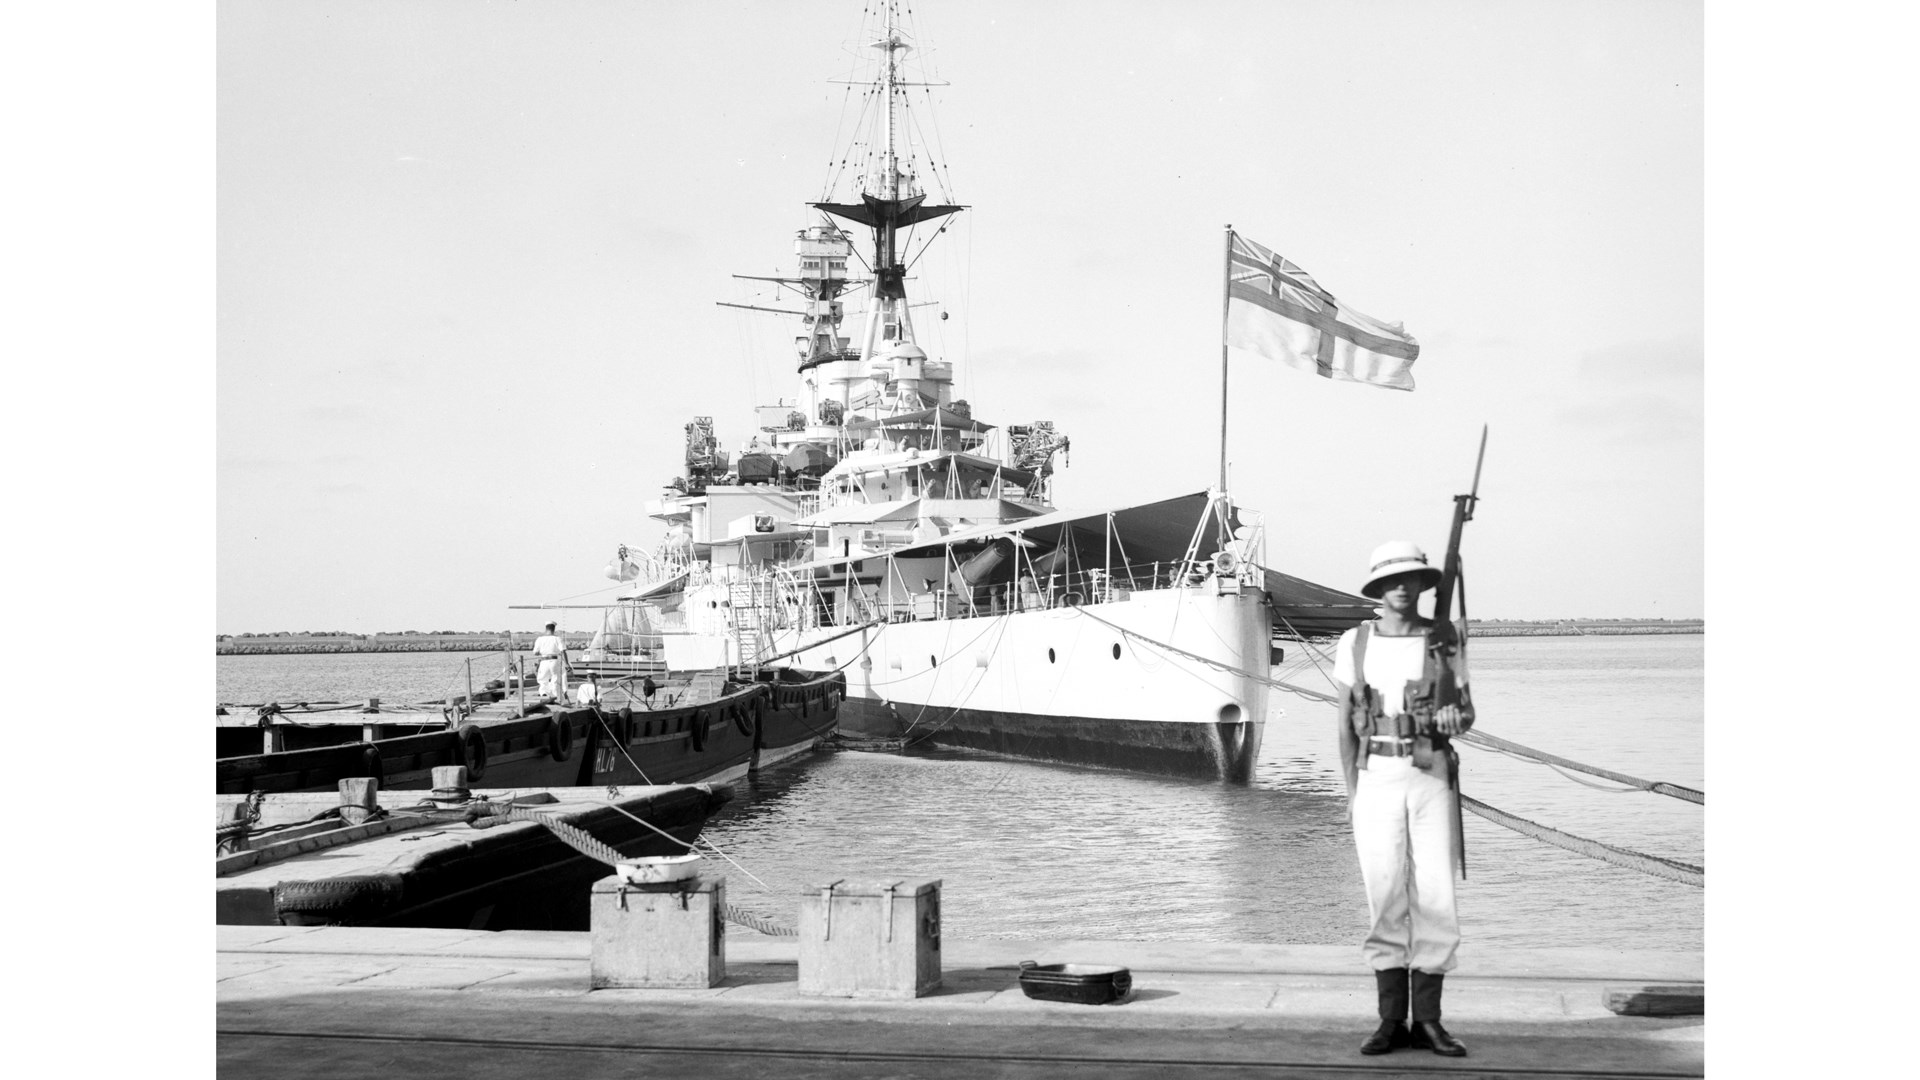 A show of force:  A Royal Marine stands guard ashore while the battle cruiser HMS Repulse (6x 15-inch guns) is moored at Haifa.  Library of Congress